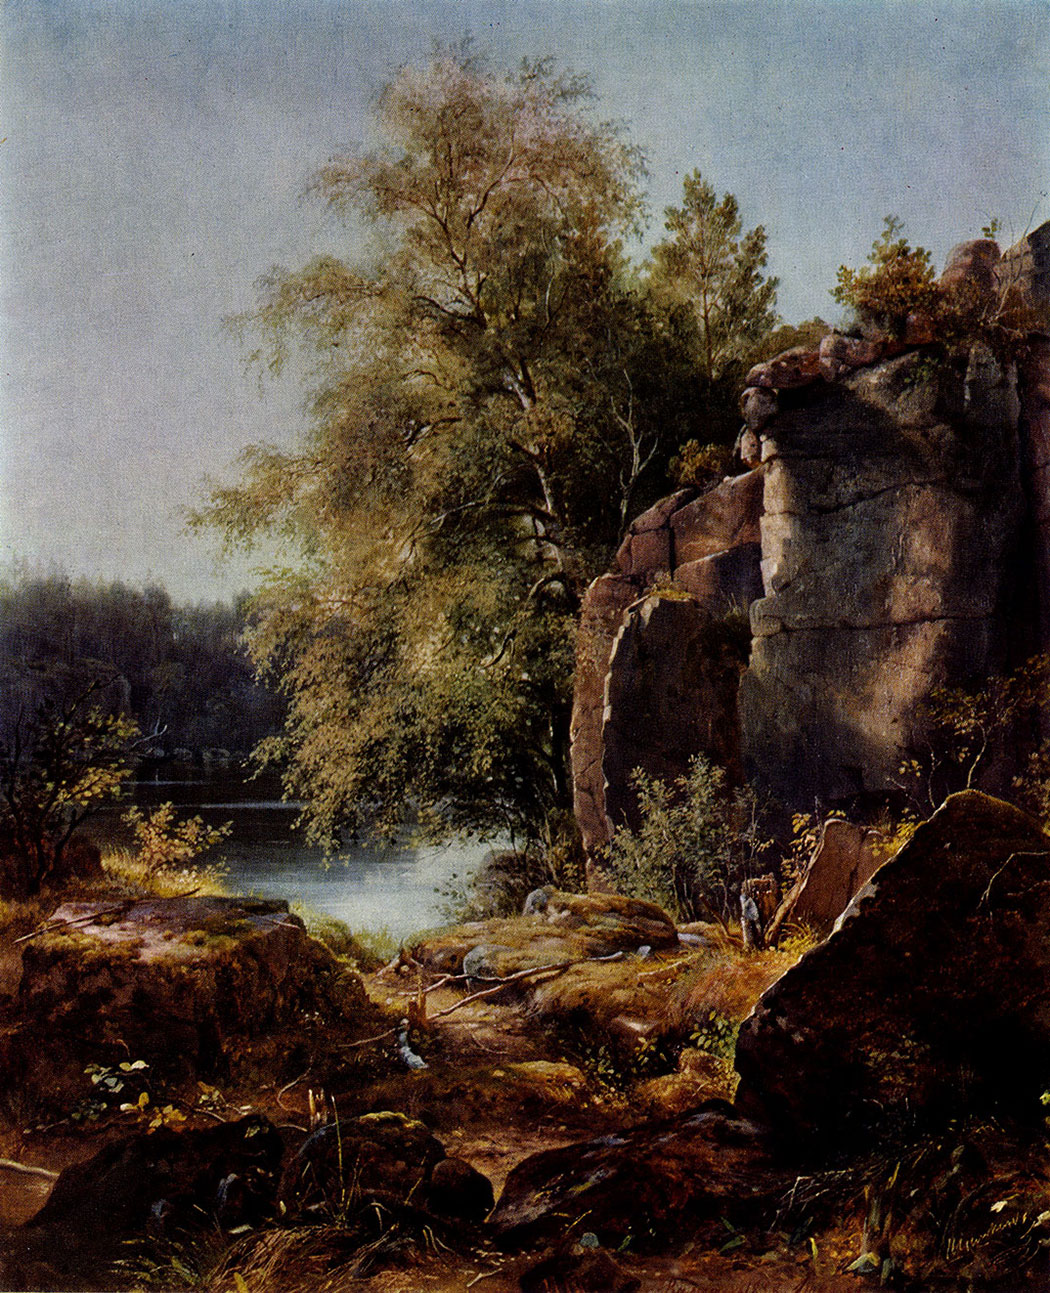 6. View of Valaam island. 1858. Oil on canvas. 66.5X56 cm. Museum of Russian Art, Kiev